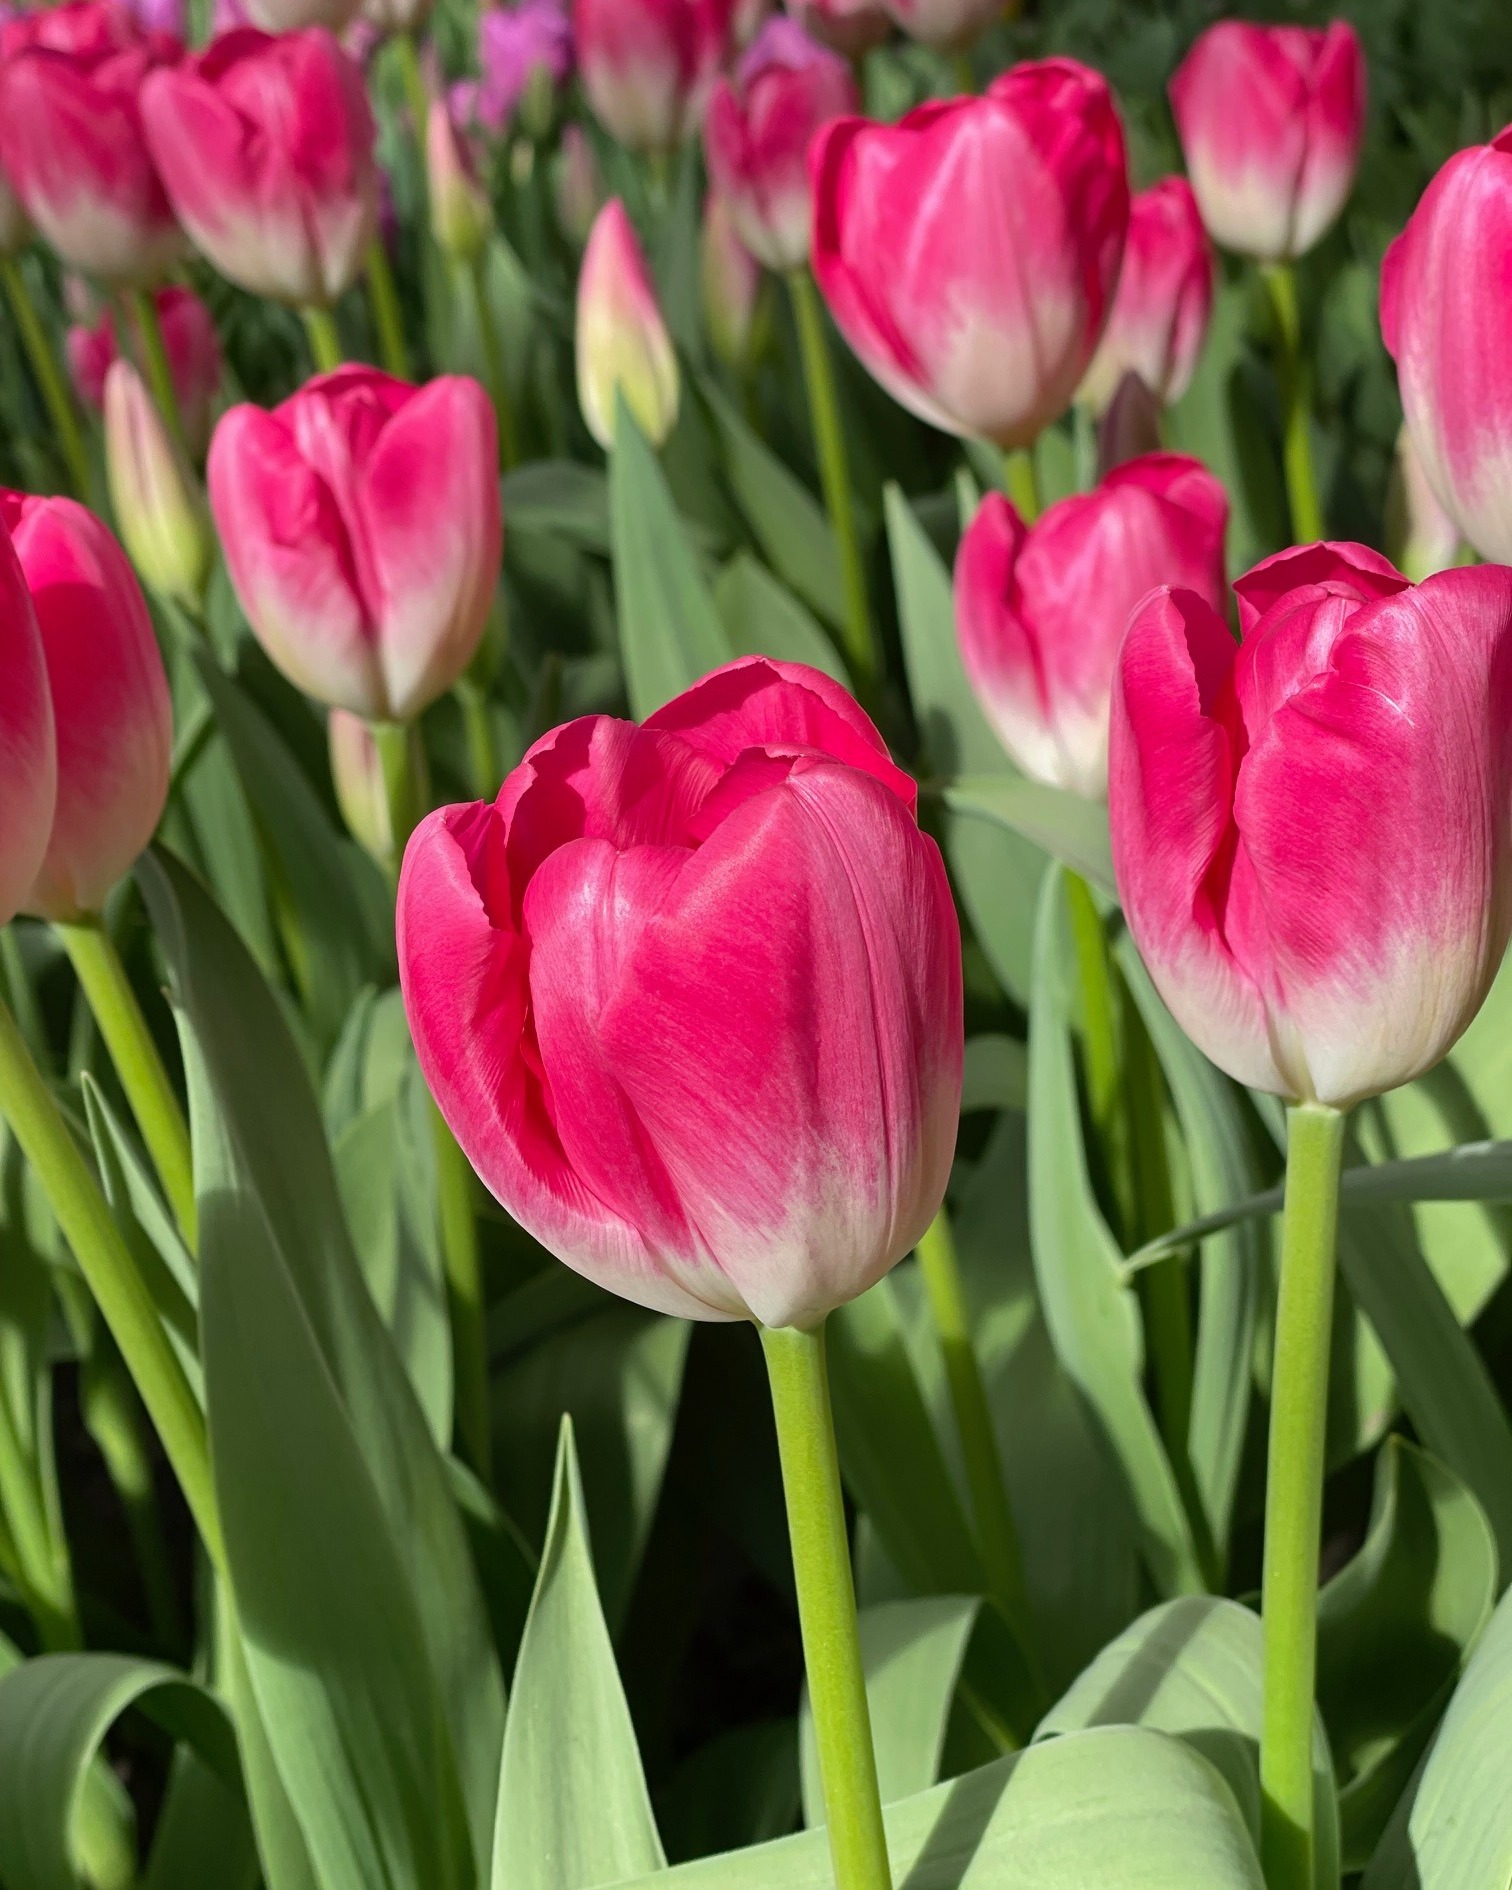 We wish you a very nice day! Who else is looking forward to Spring...? 🌷🌞

Plan your visit to the tulips on:
> www.tulipfestivalamsterdam.com

#tulips #pink #flowers #lisse #keukenhof #keukenhofgardens #bollenstreek #flowerbulbs #spring #lovepink #colours #holland #netherlands #hollandtrip #dutch #flowerpower #tulpenliebe #tulipas #spring #frühjahr #molla #primavera #printemps